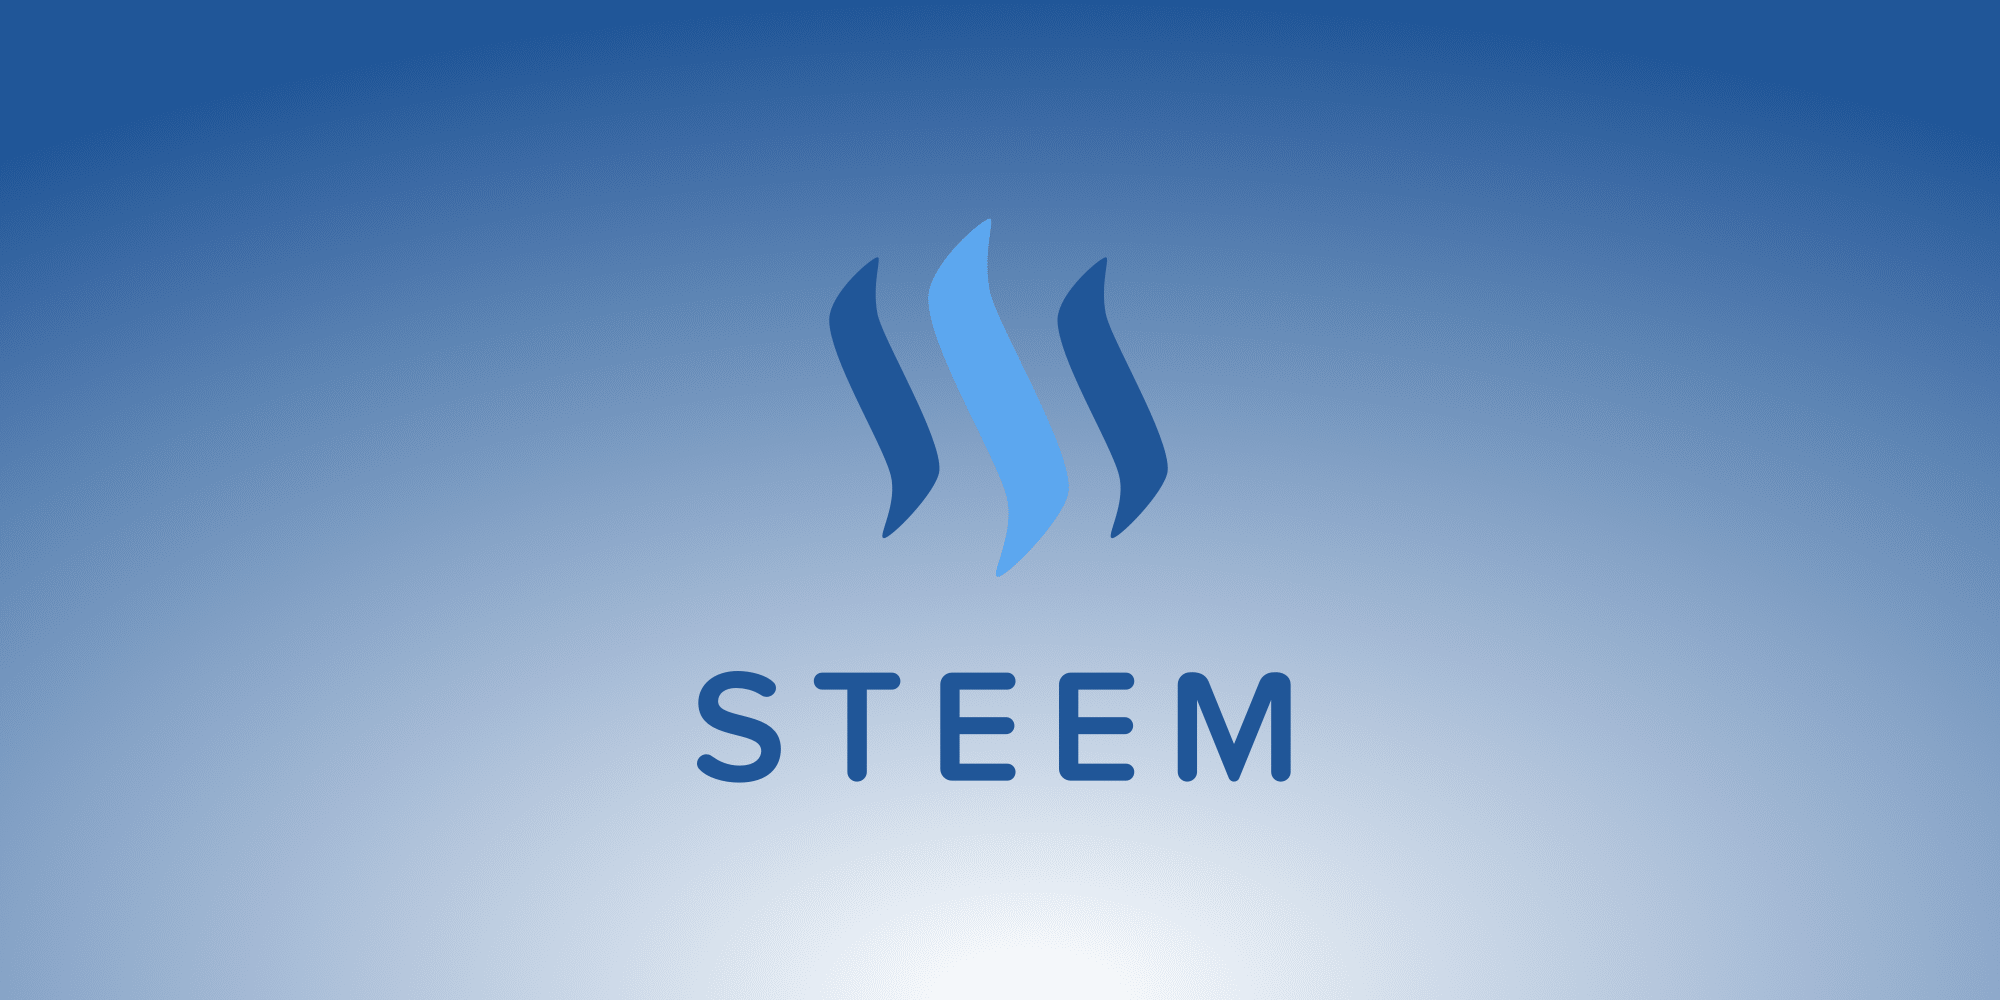 What is Steem?